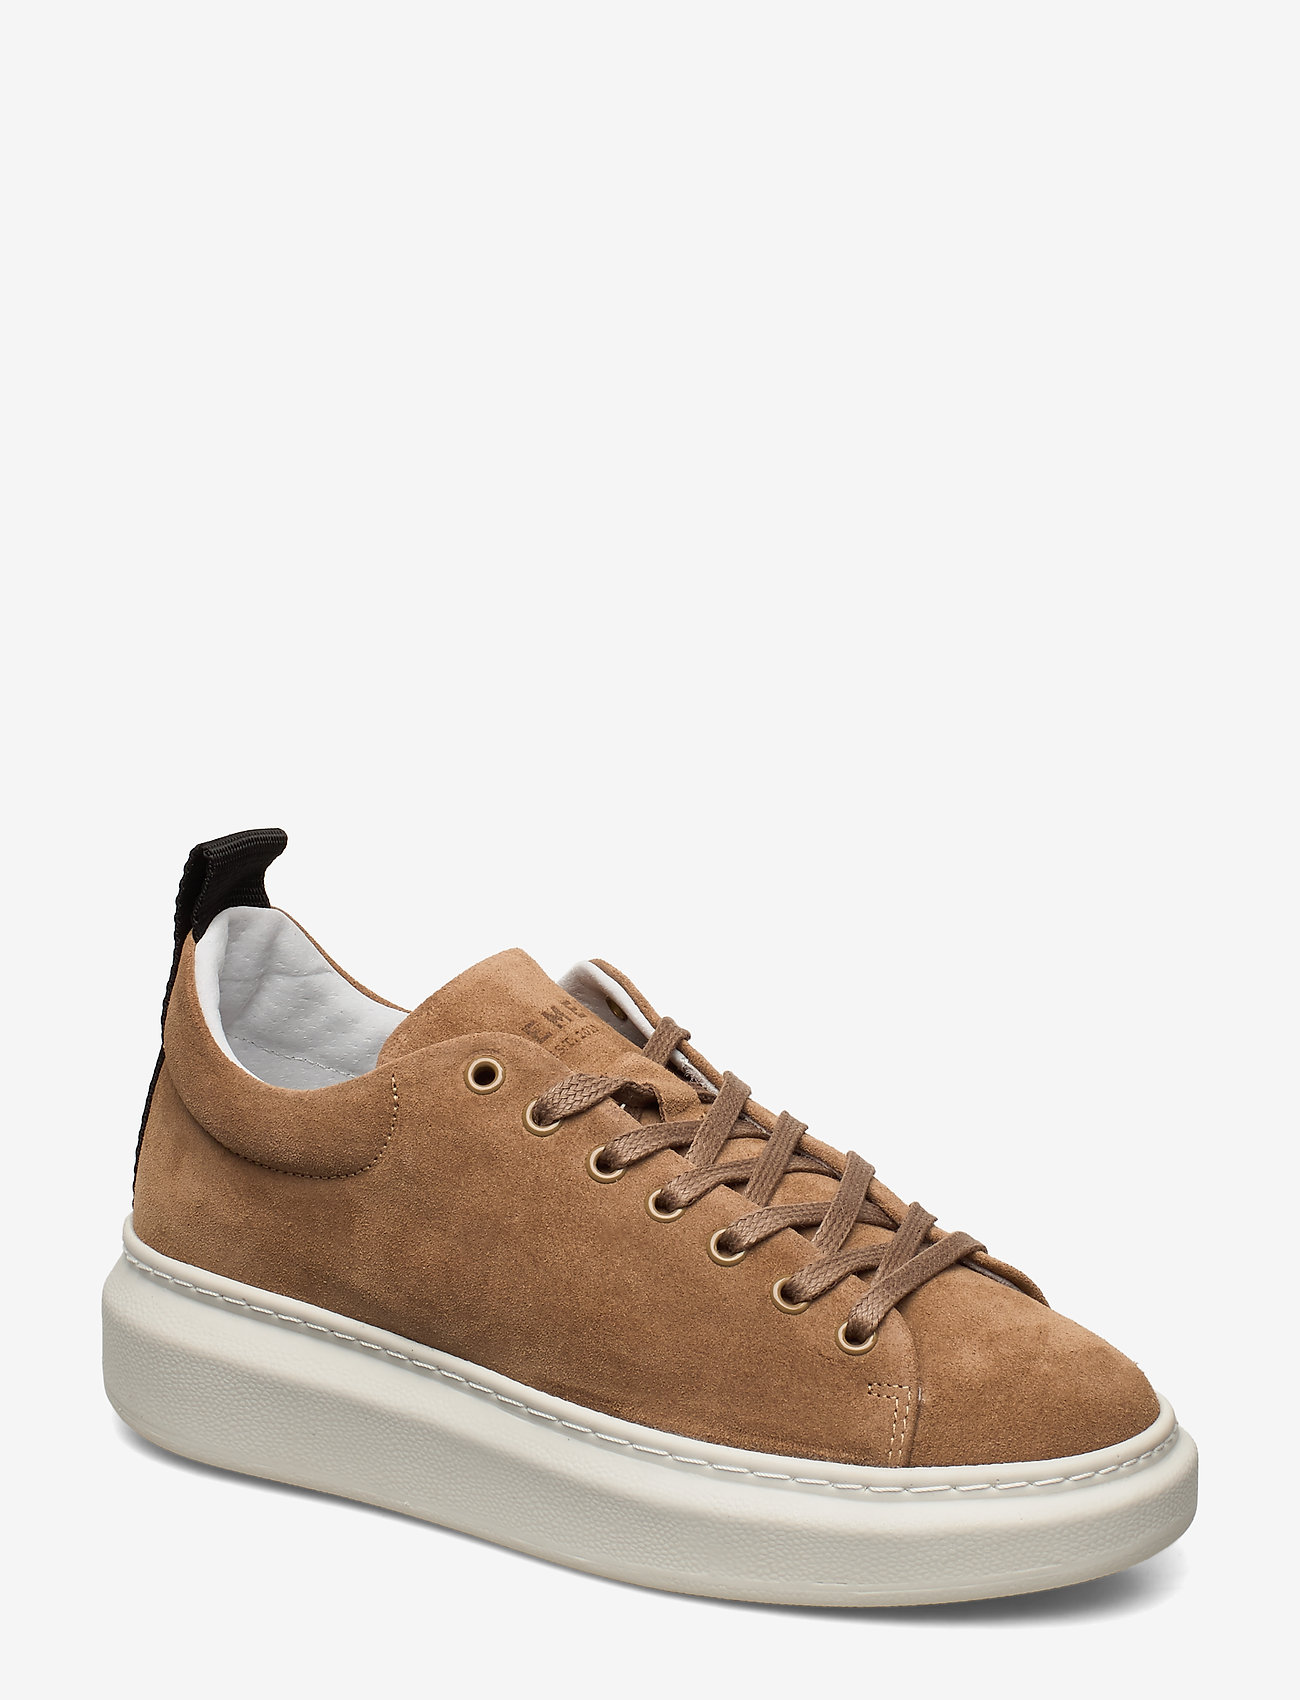 taupe suede sneakers